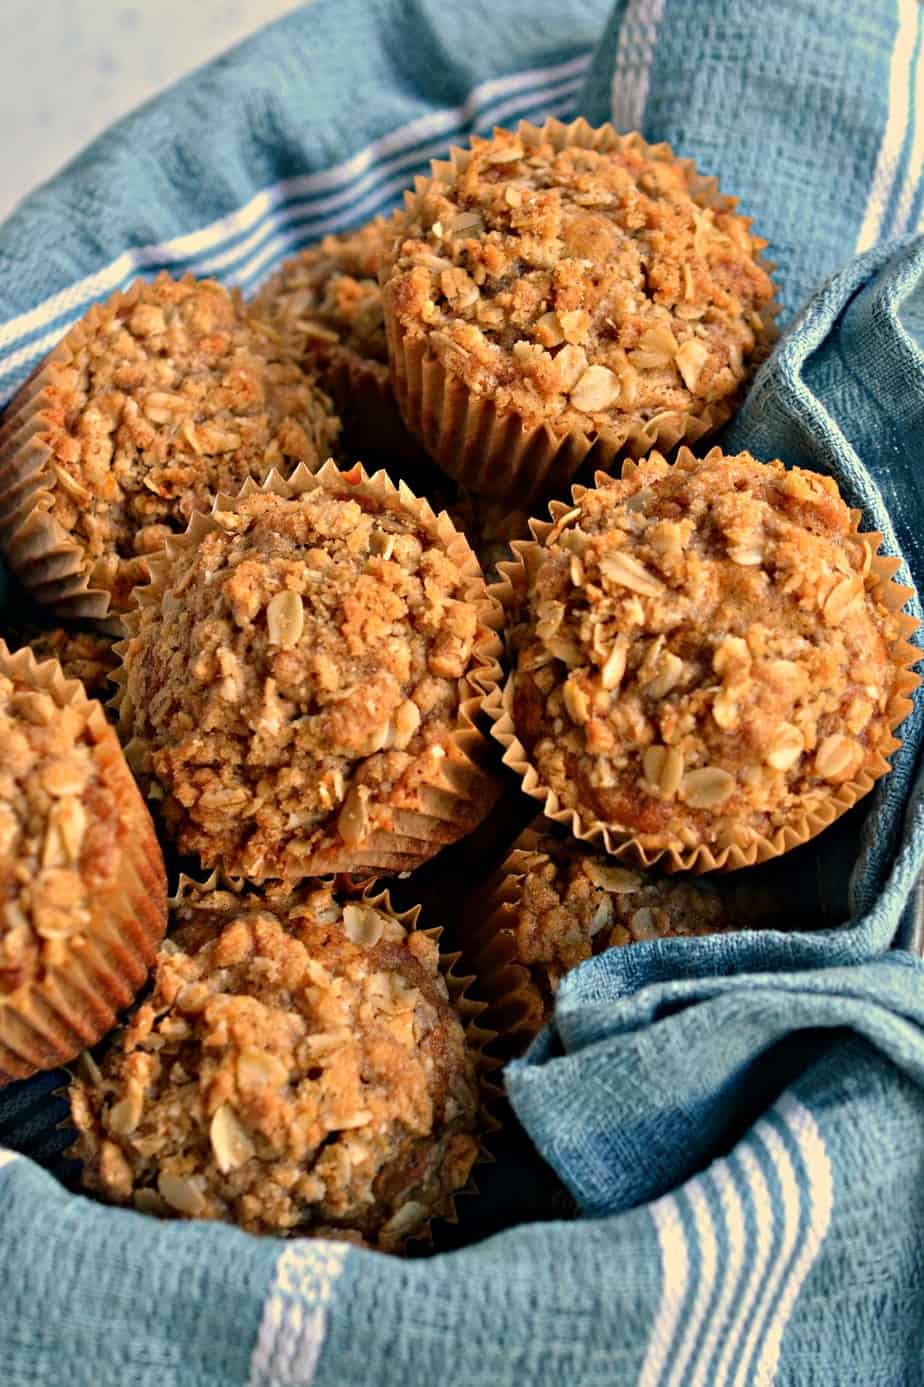 I love to serve these Oatmeal Muffins at holiday brunches. 